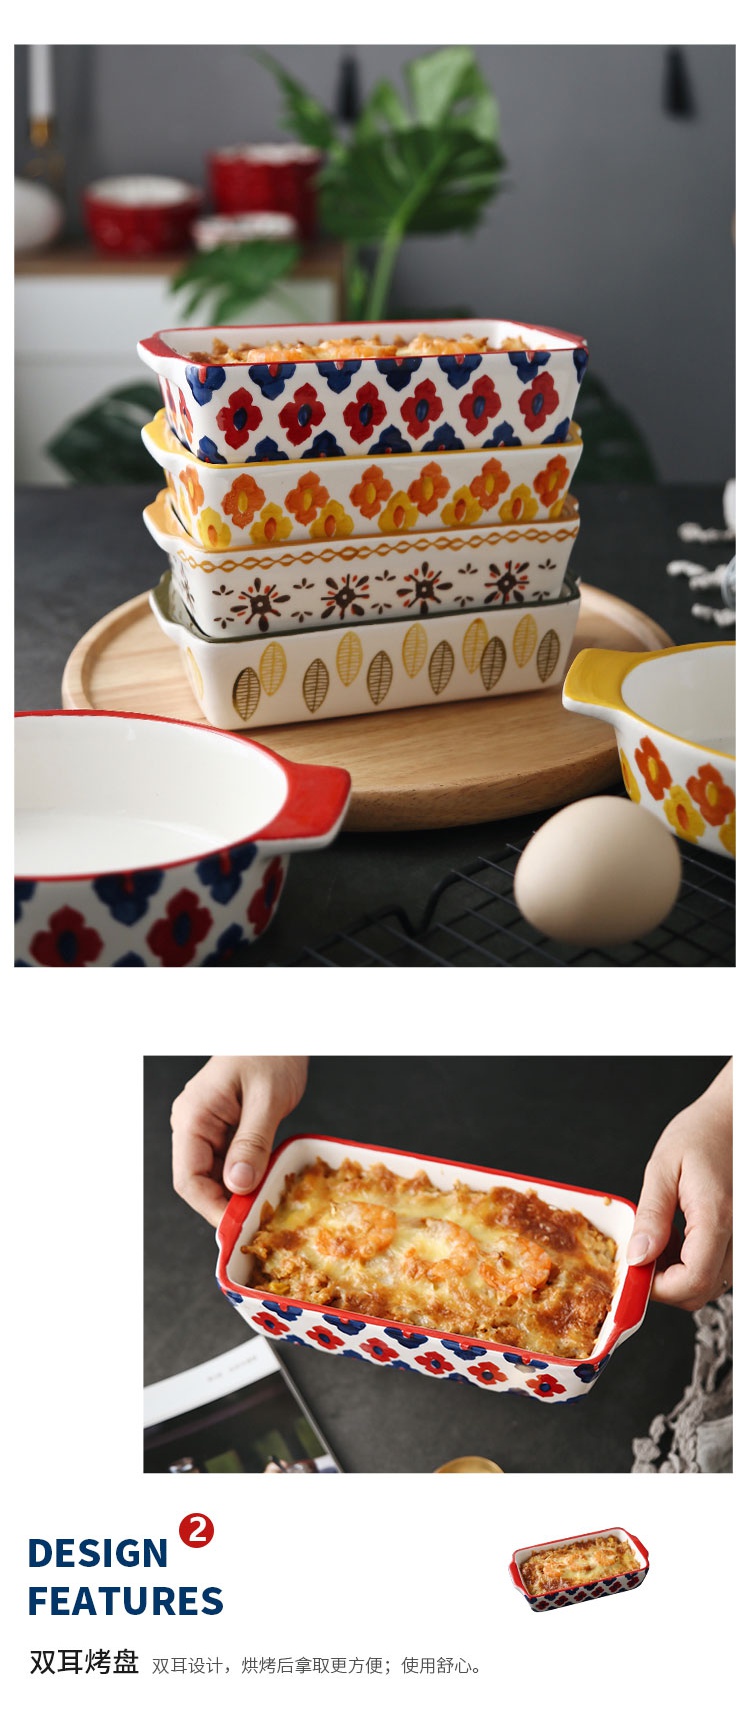 Ears rectangle plate ceramic baking oven with cheese baked FanPan with American baking utensils creative dish